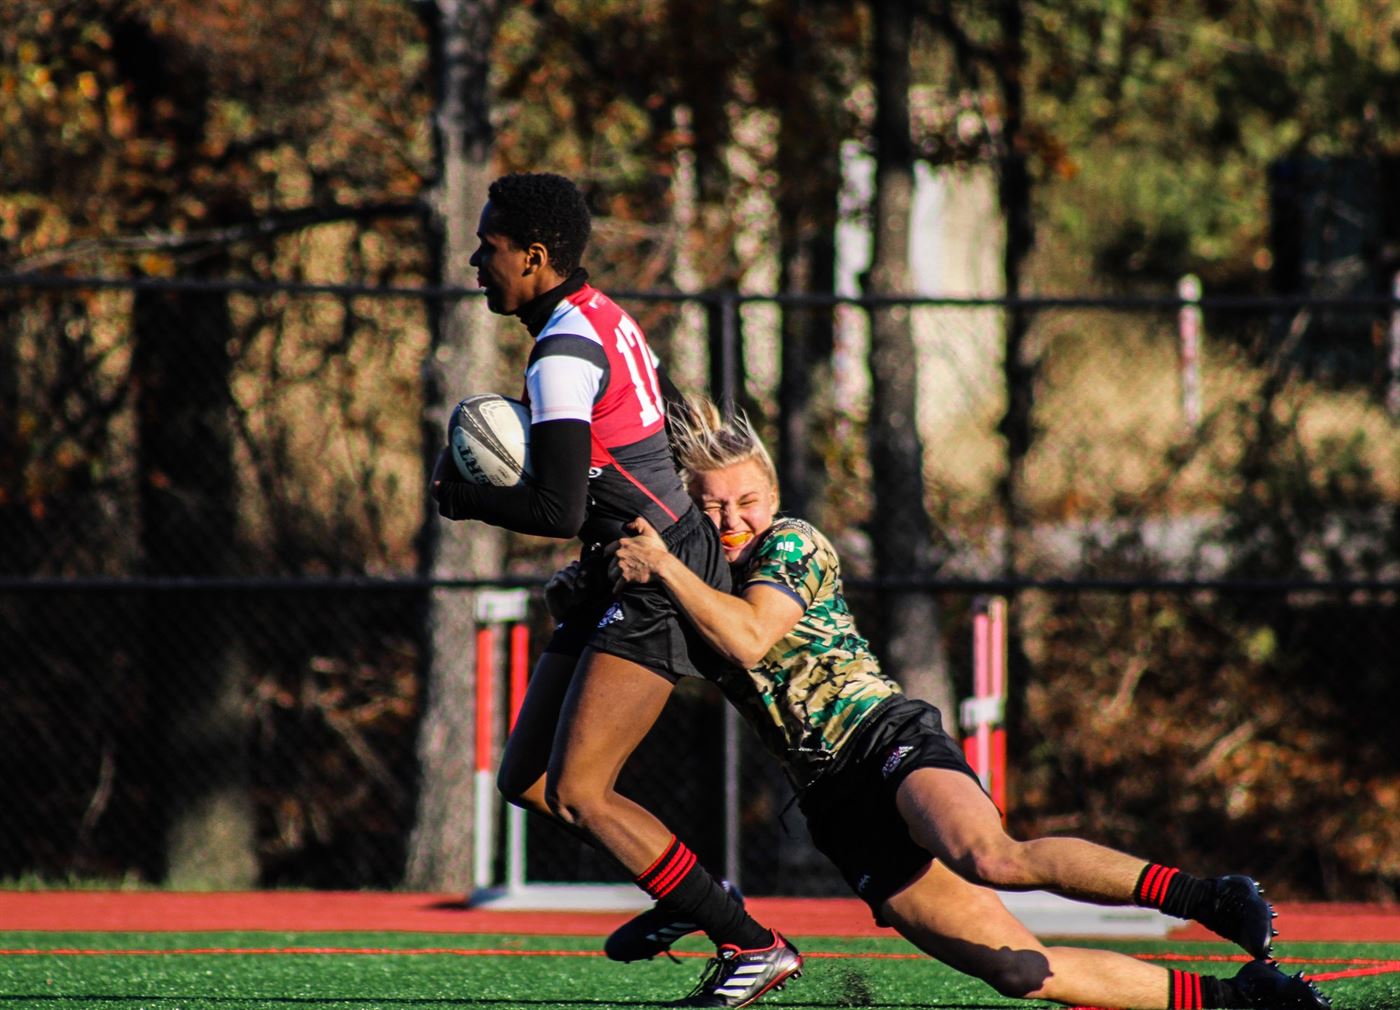 Junior flanker/lock Jane Carino chases down an opposing player. Corey Annan | The Montclarion